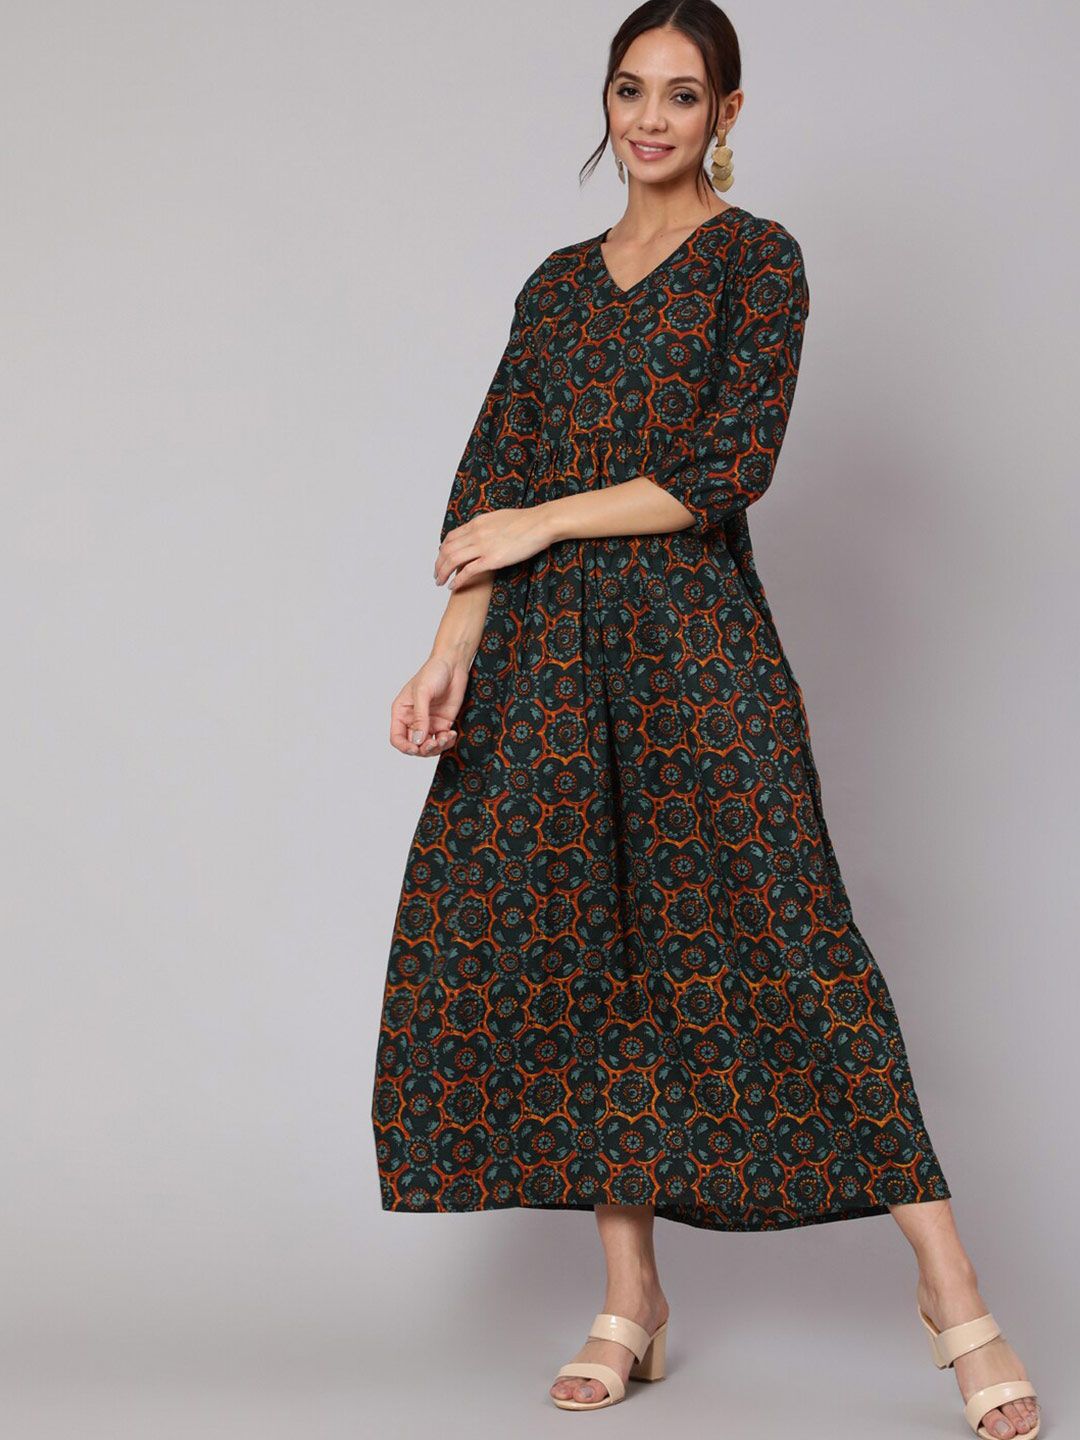 Nayo Green Floral Ethnic Maxi Dress Price in India